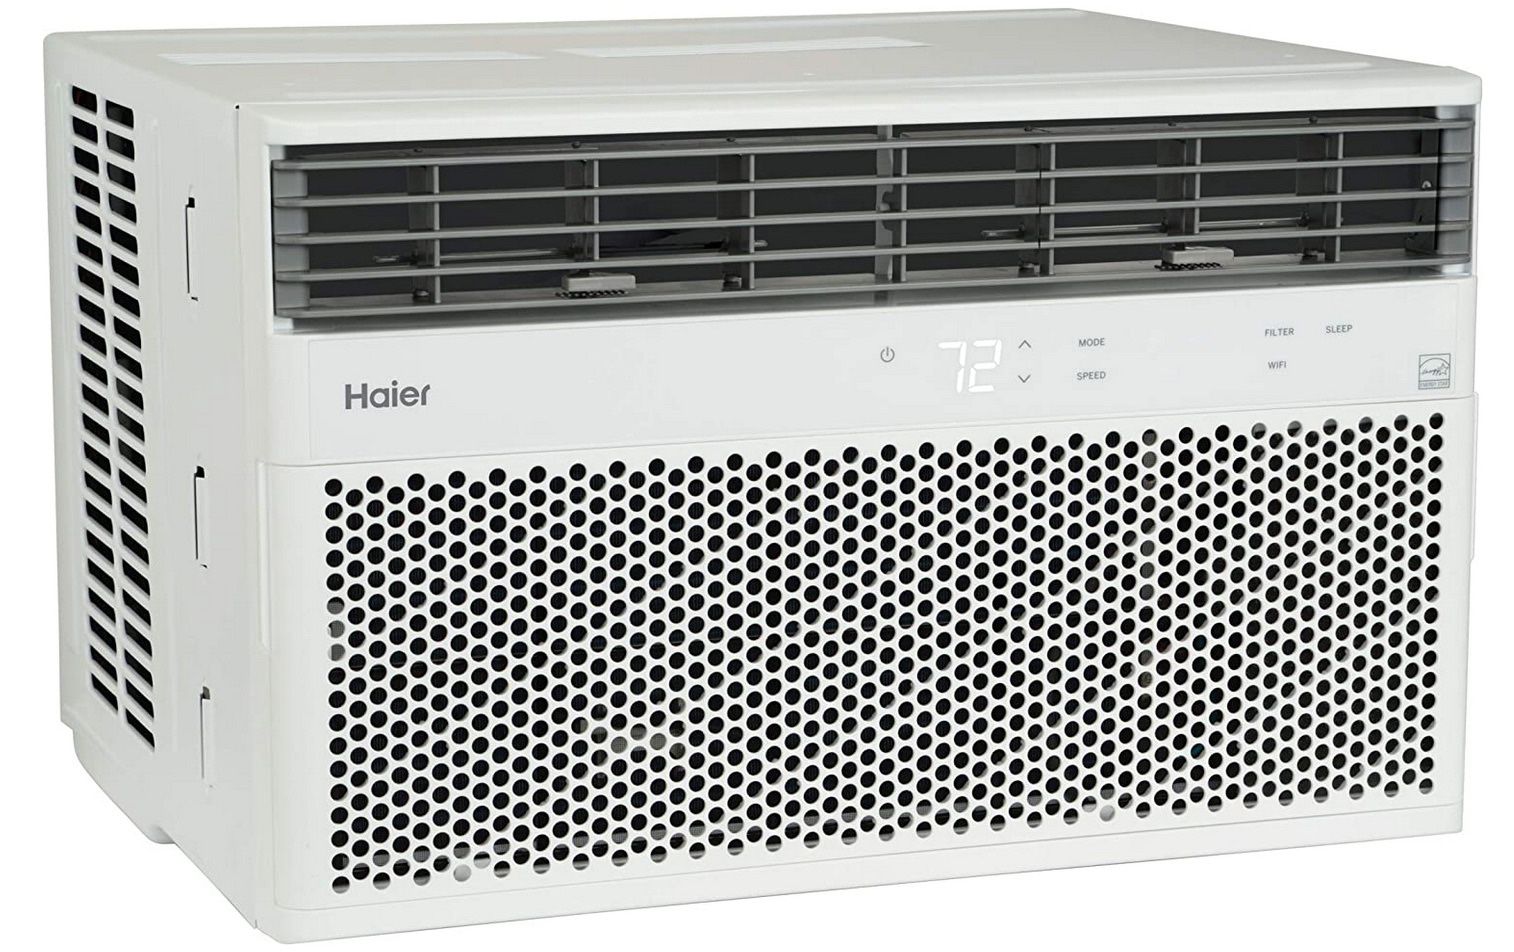 Haier Window Air Conditioner 12000 BTU, Wi-Fi Enabled, Energy-Efficient Cooling for Large Rooms, 12K BTU Window AC Unit with Easy Install Kit, Control